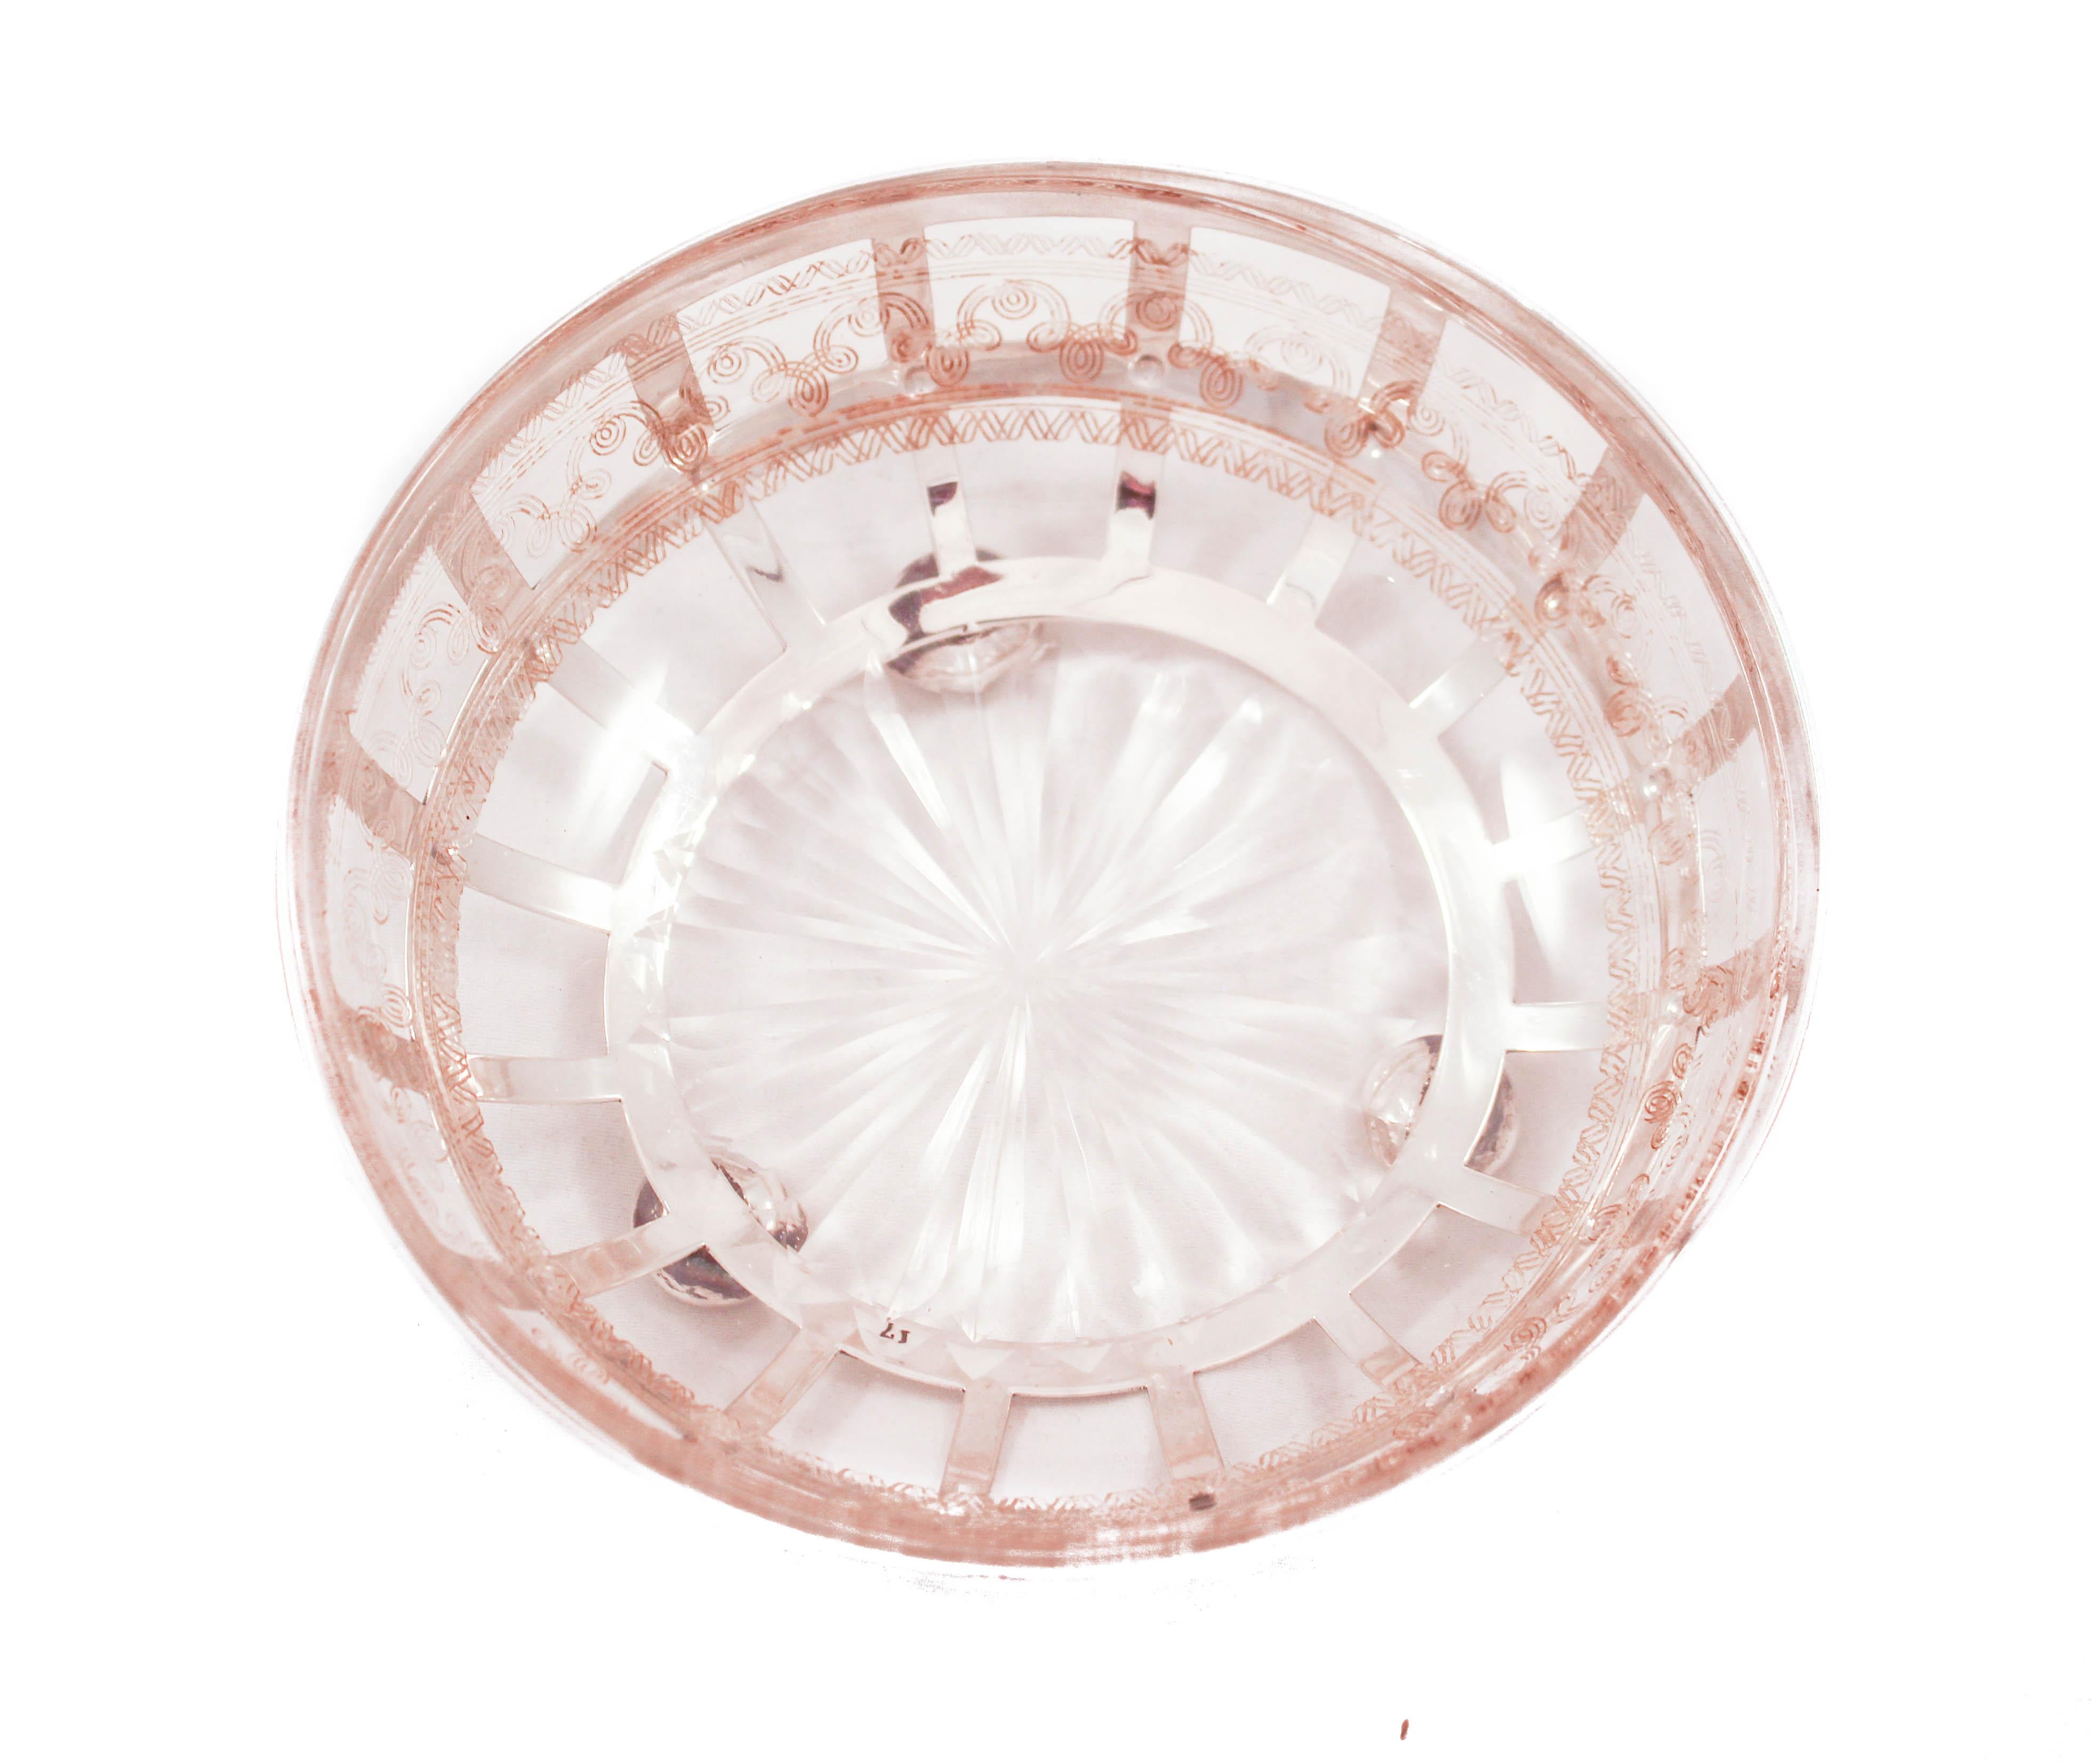 This sterling silver dish has an Art Deco design with its square cutouts and ball-feet. However, the glass liner, original to this piece, has an acid-etched pattern around the edge and a starburst in the floor center. An interesting mix of modern